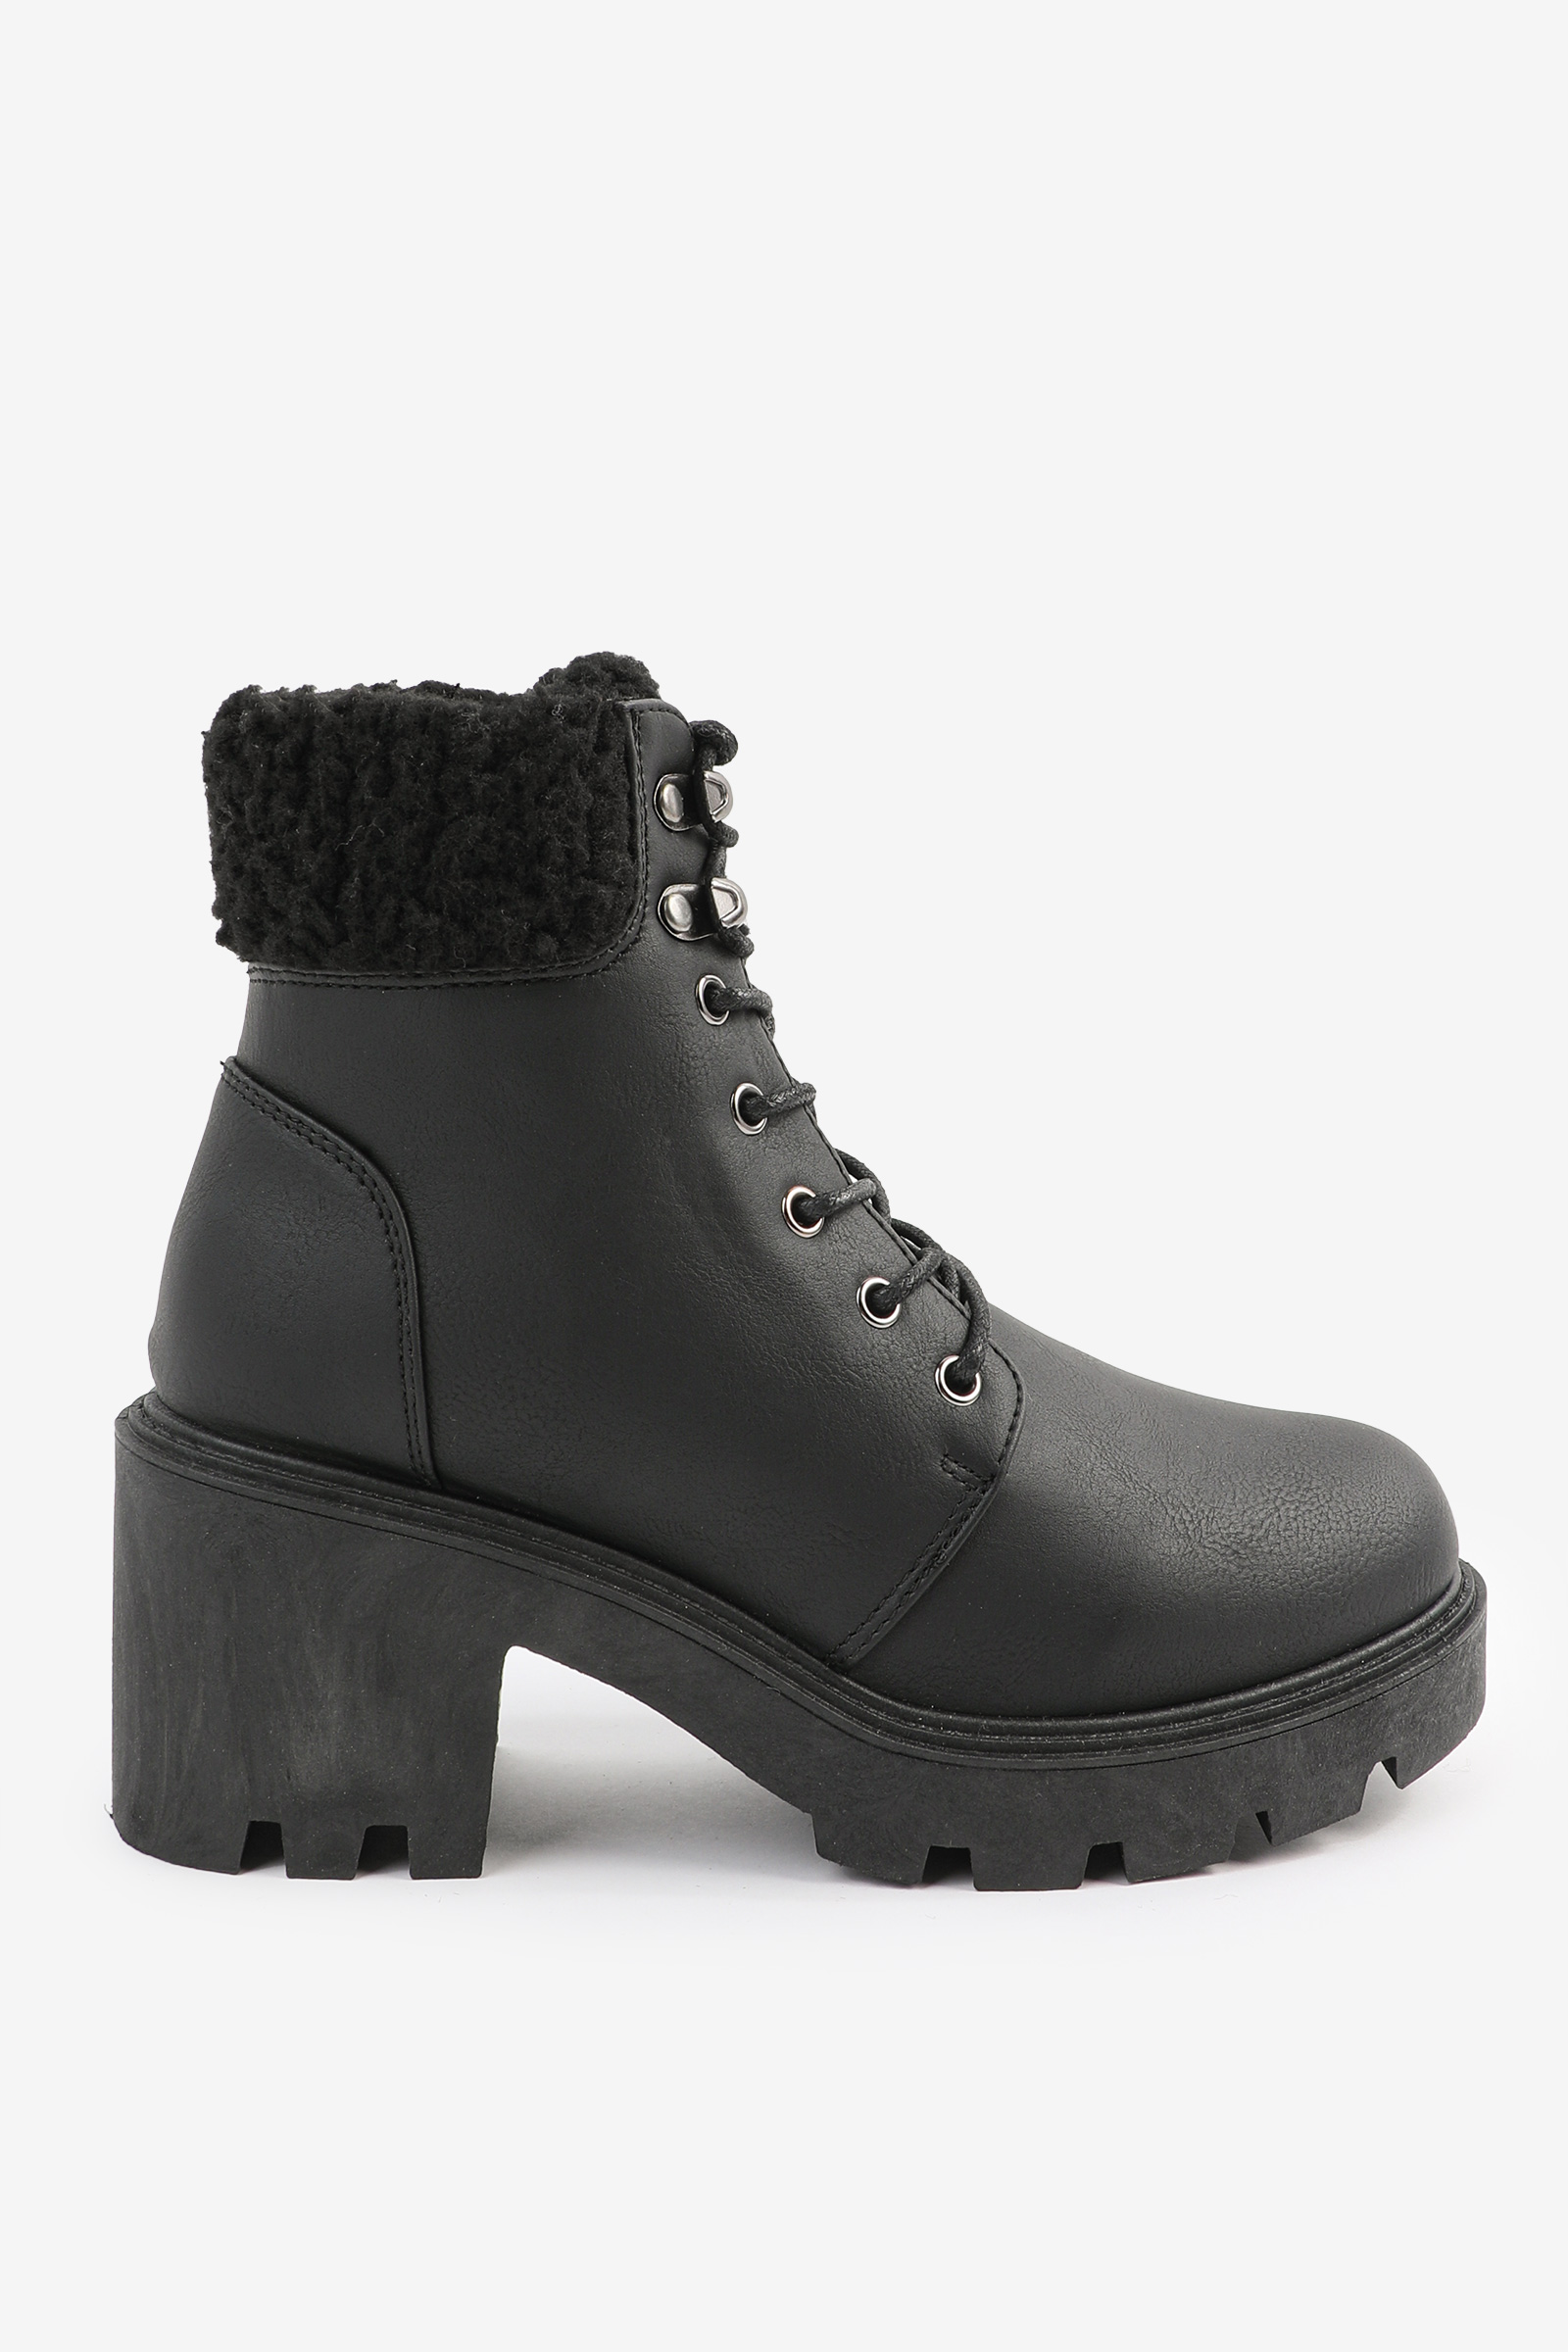 Ardene Warm-Lined Ankle Boots on Lug Sole in | Size | Faux Leather | Microfiber